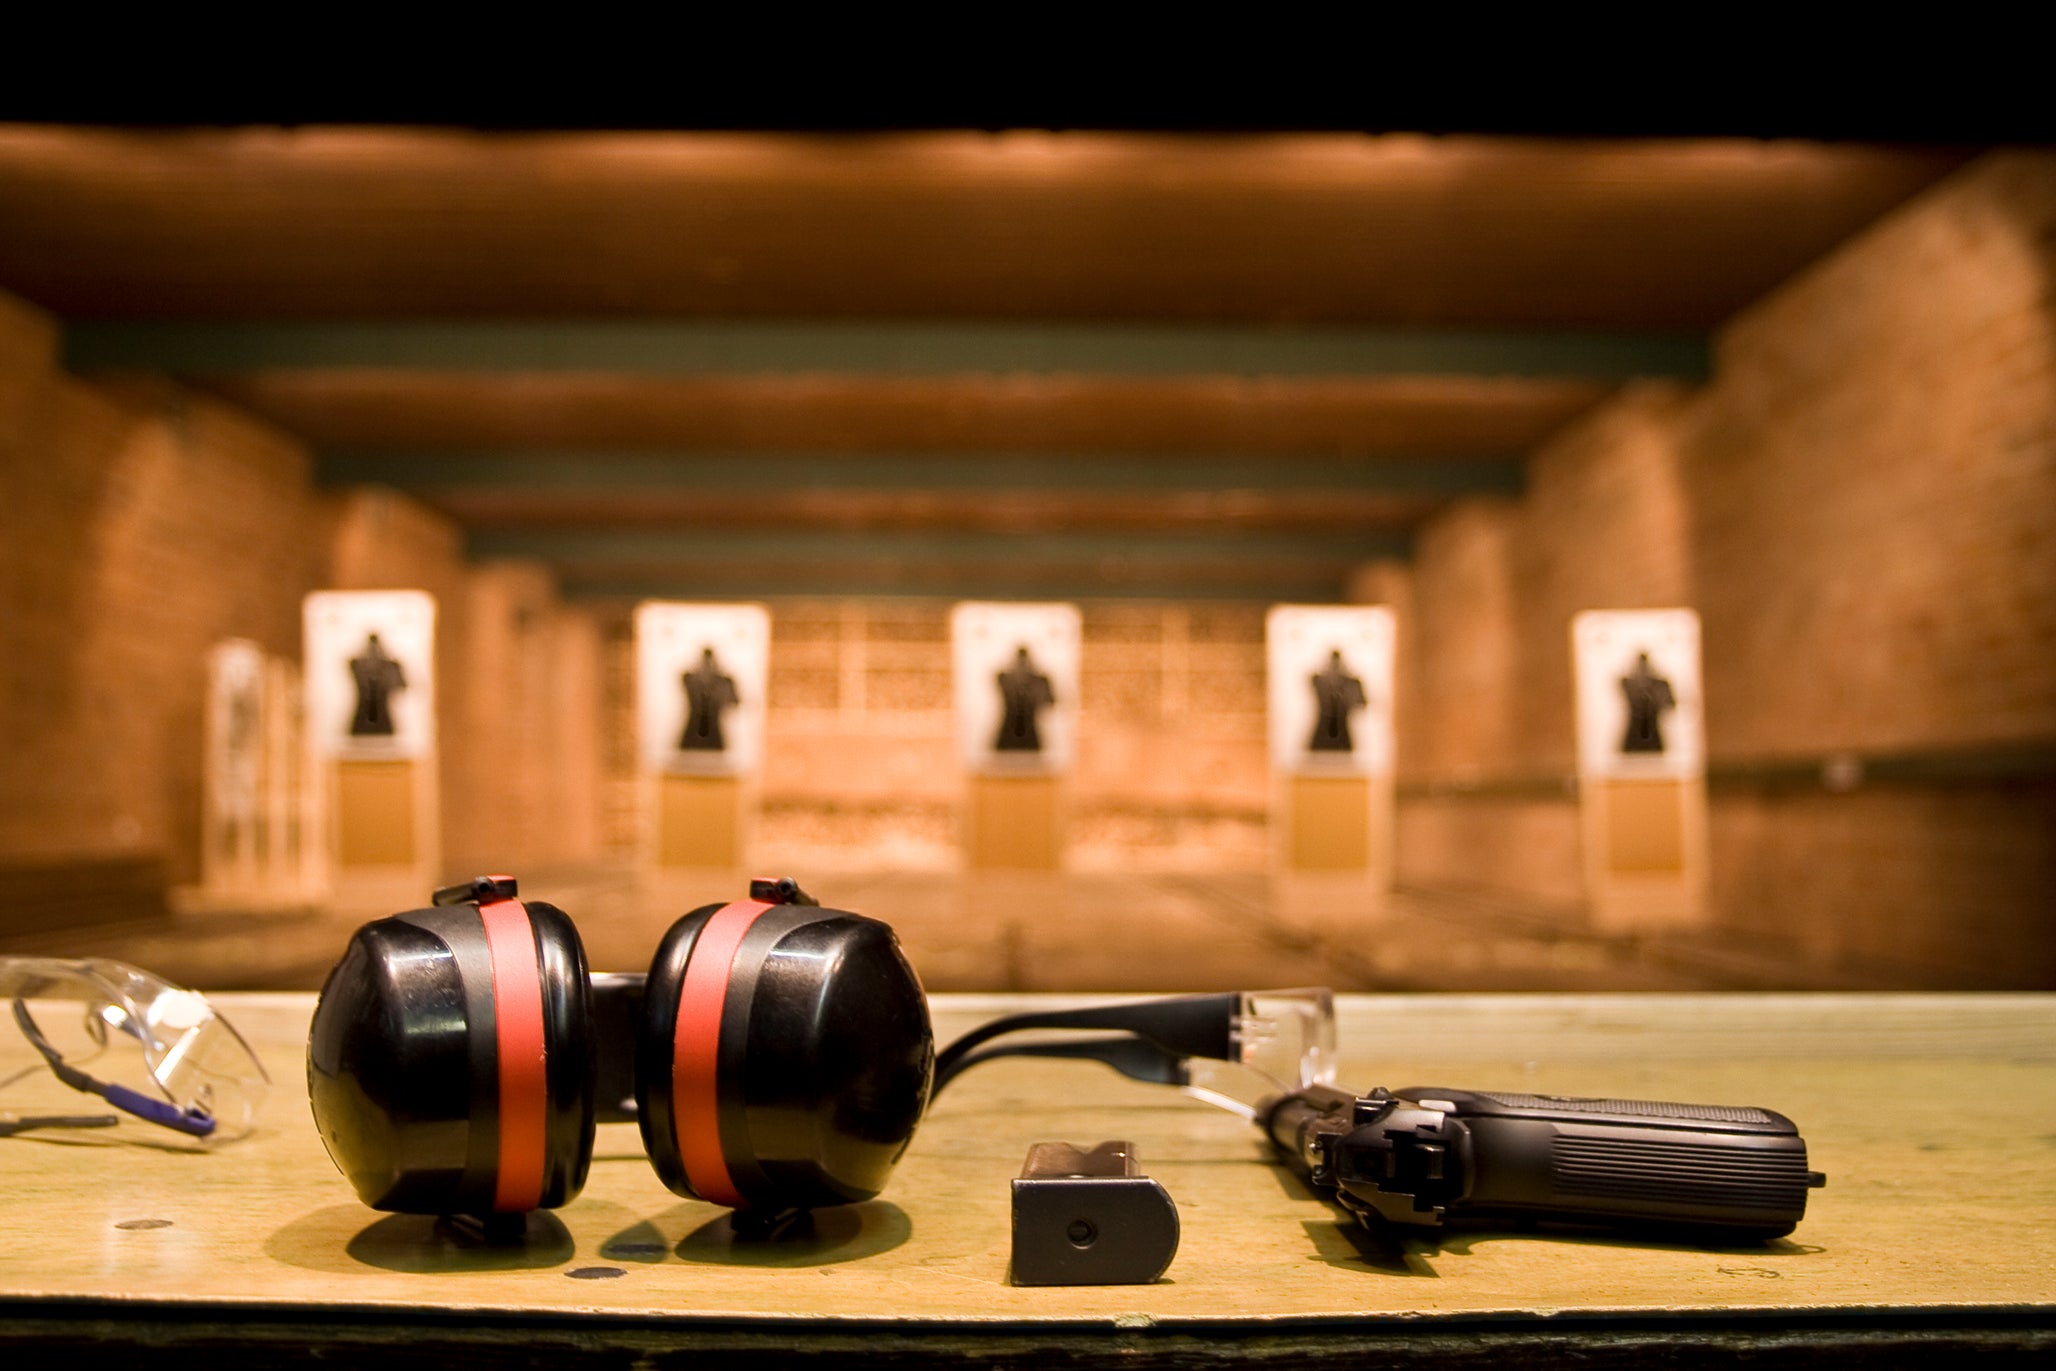 Stock image of shooting equipment ready to use